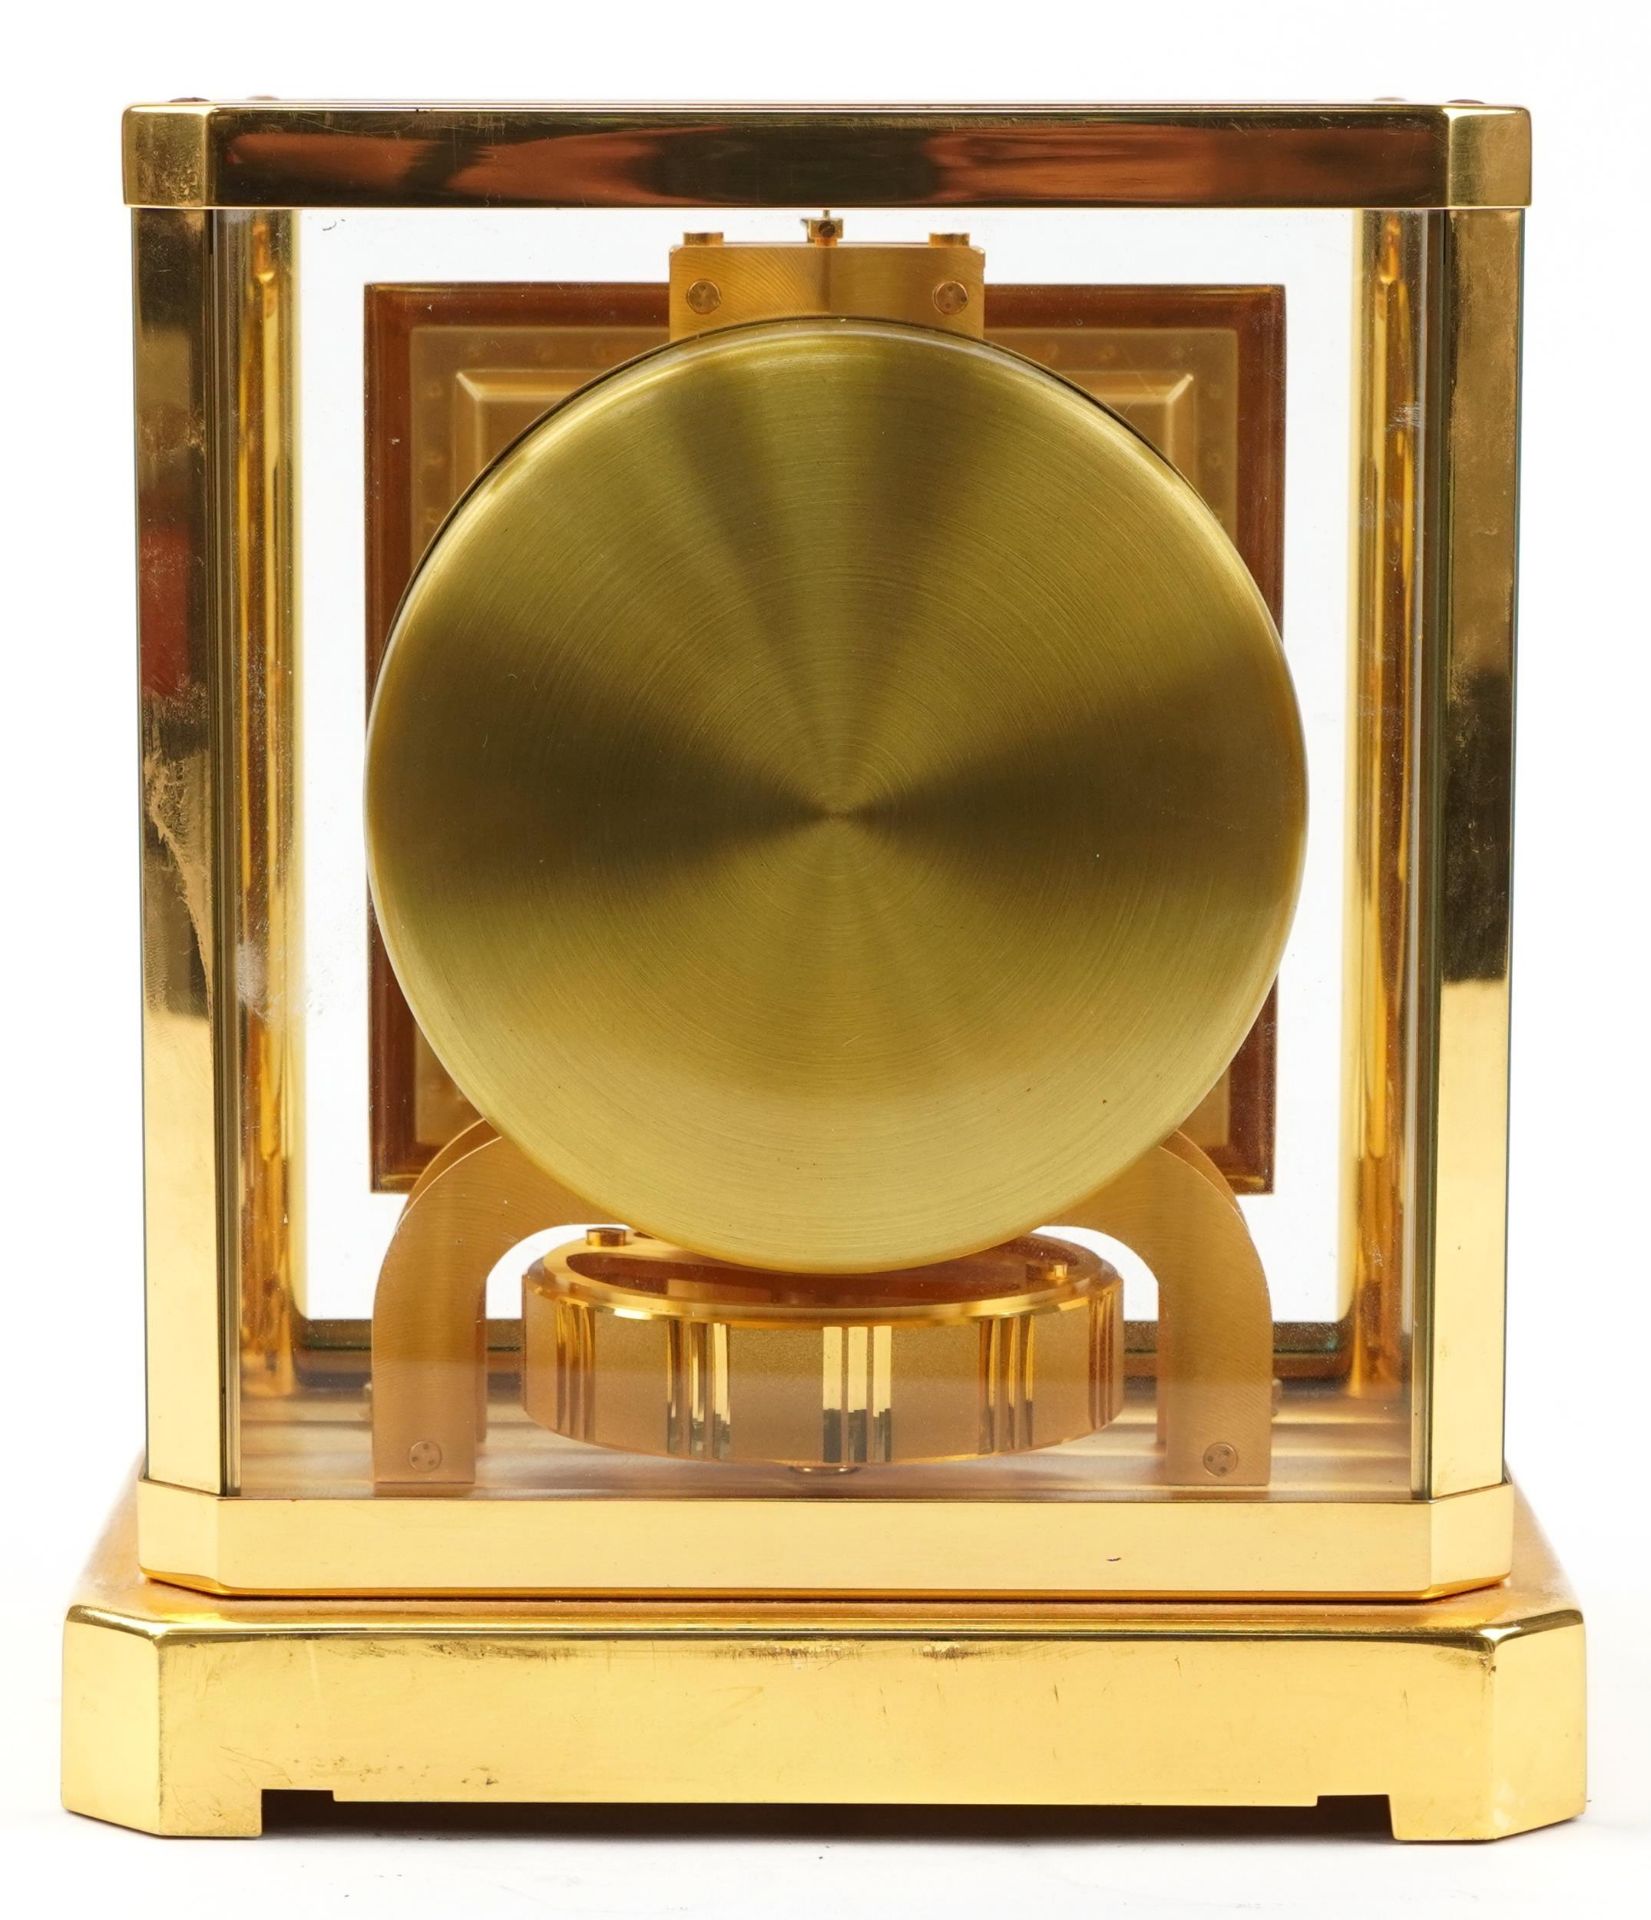 Jaeger LeCoultre brass cased Atmos clock, 23.5cm H x 20.5cm W x 17cm D : For further information - Image 3 of 5